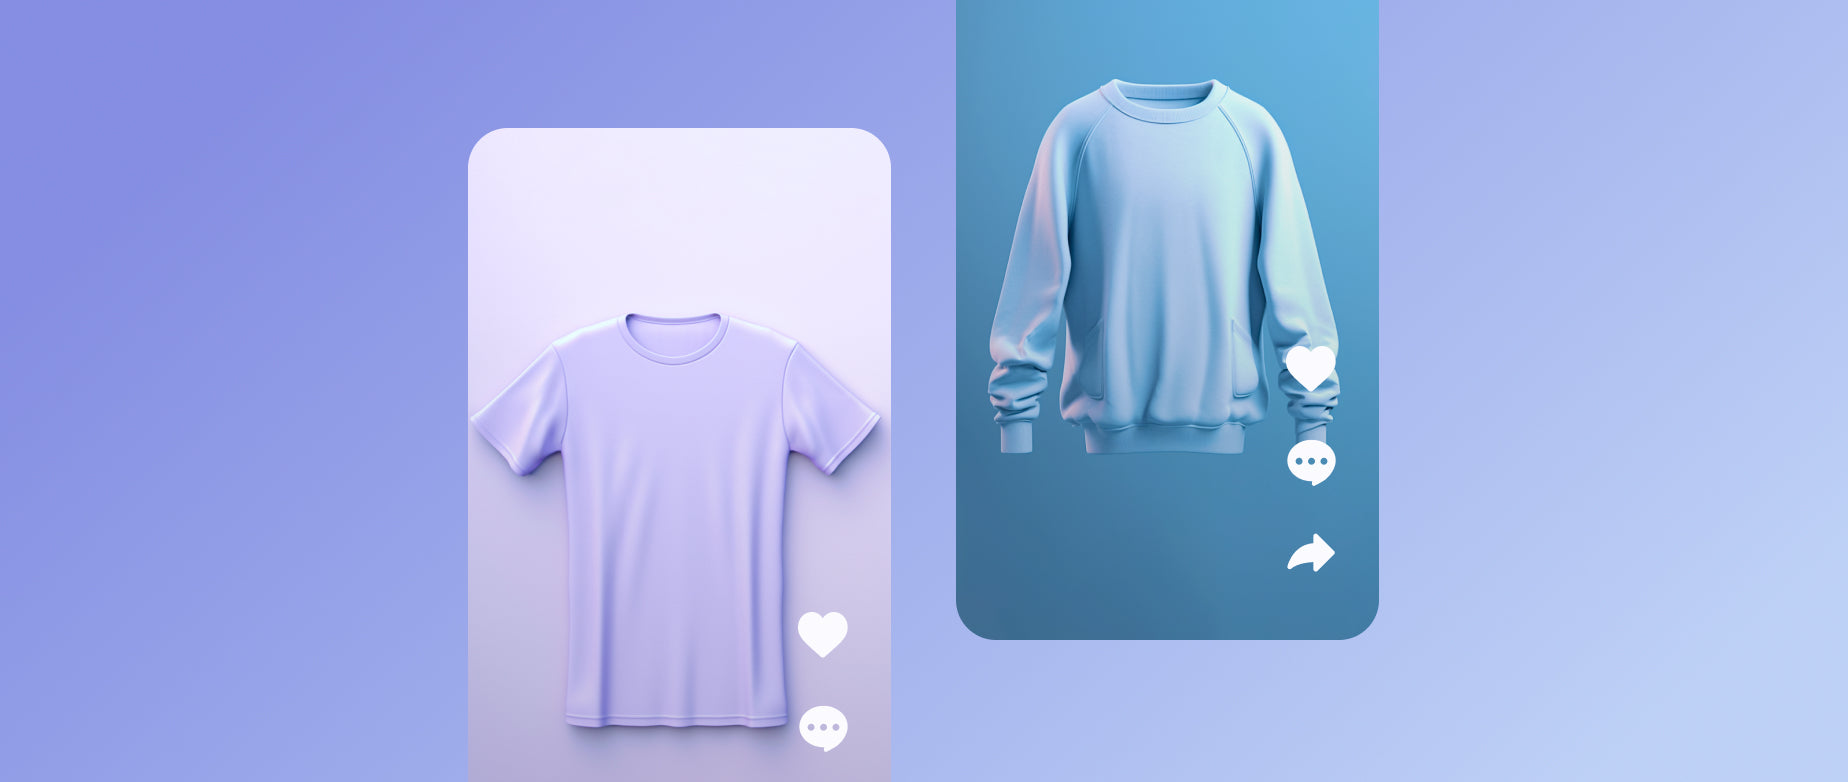 How to Make Merch for TikTok (and Sell it) in 2023 - Amplitude Marketing